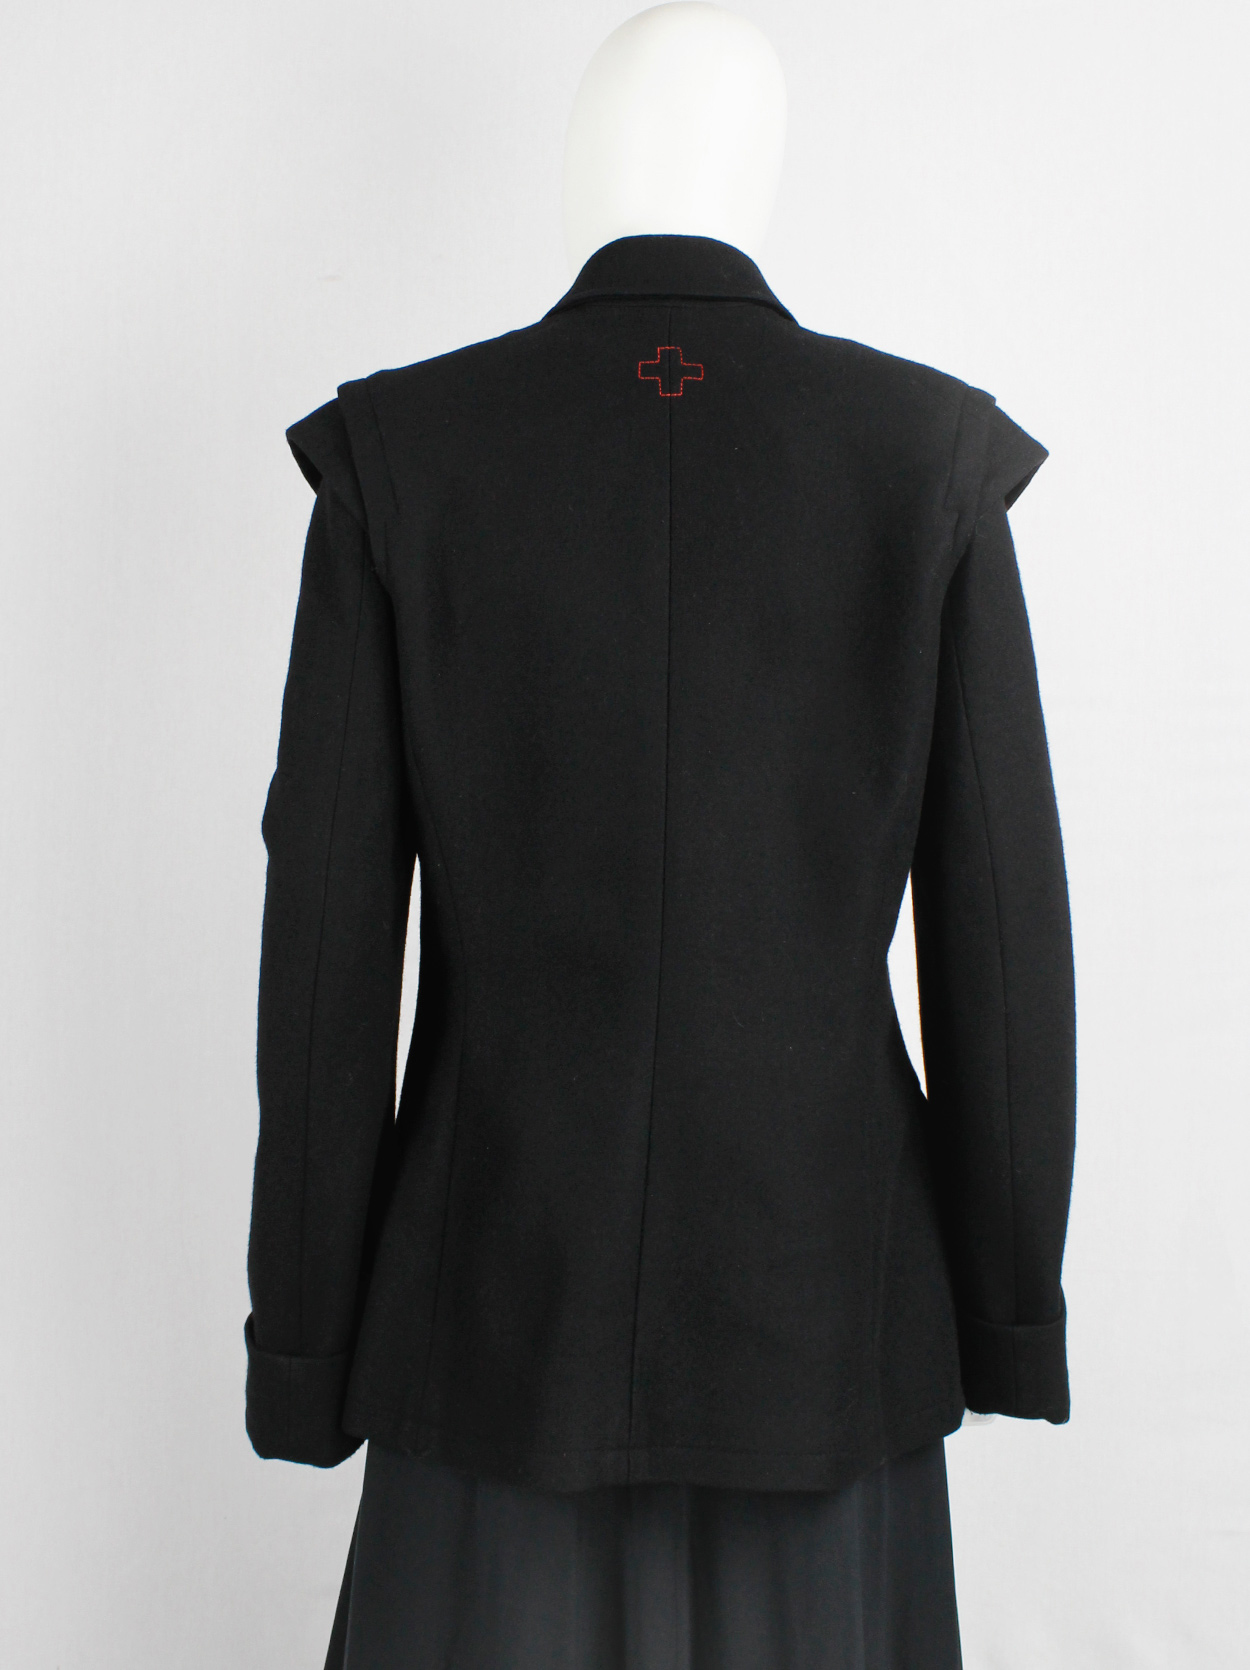 A.F. Vandevorst black military coat with gold cross buttons and ...